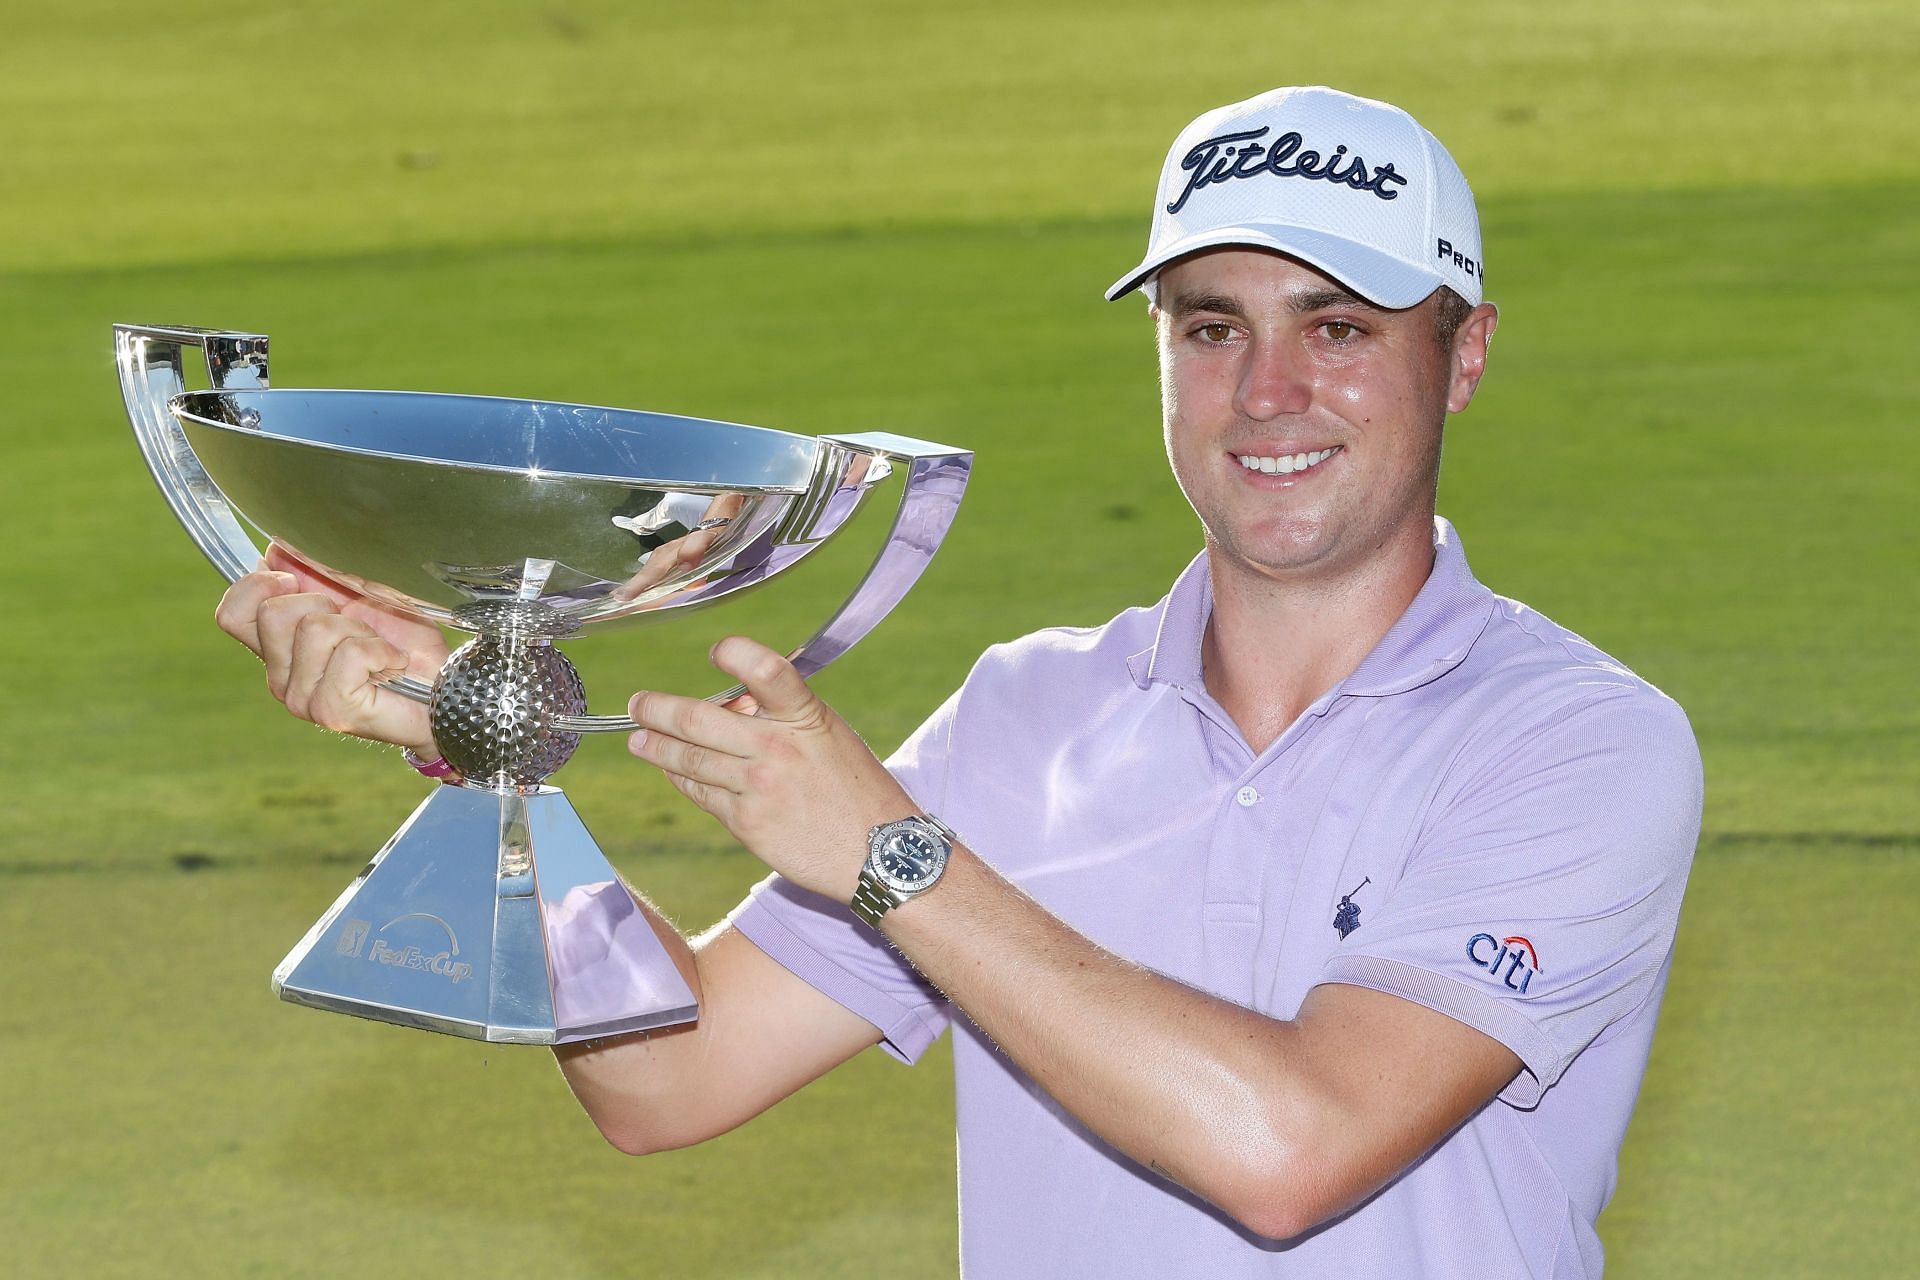 Justin Thomas poses with the trophy after winning the 2017 Playoffs